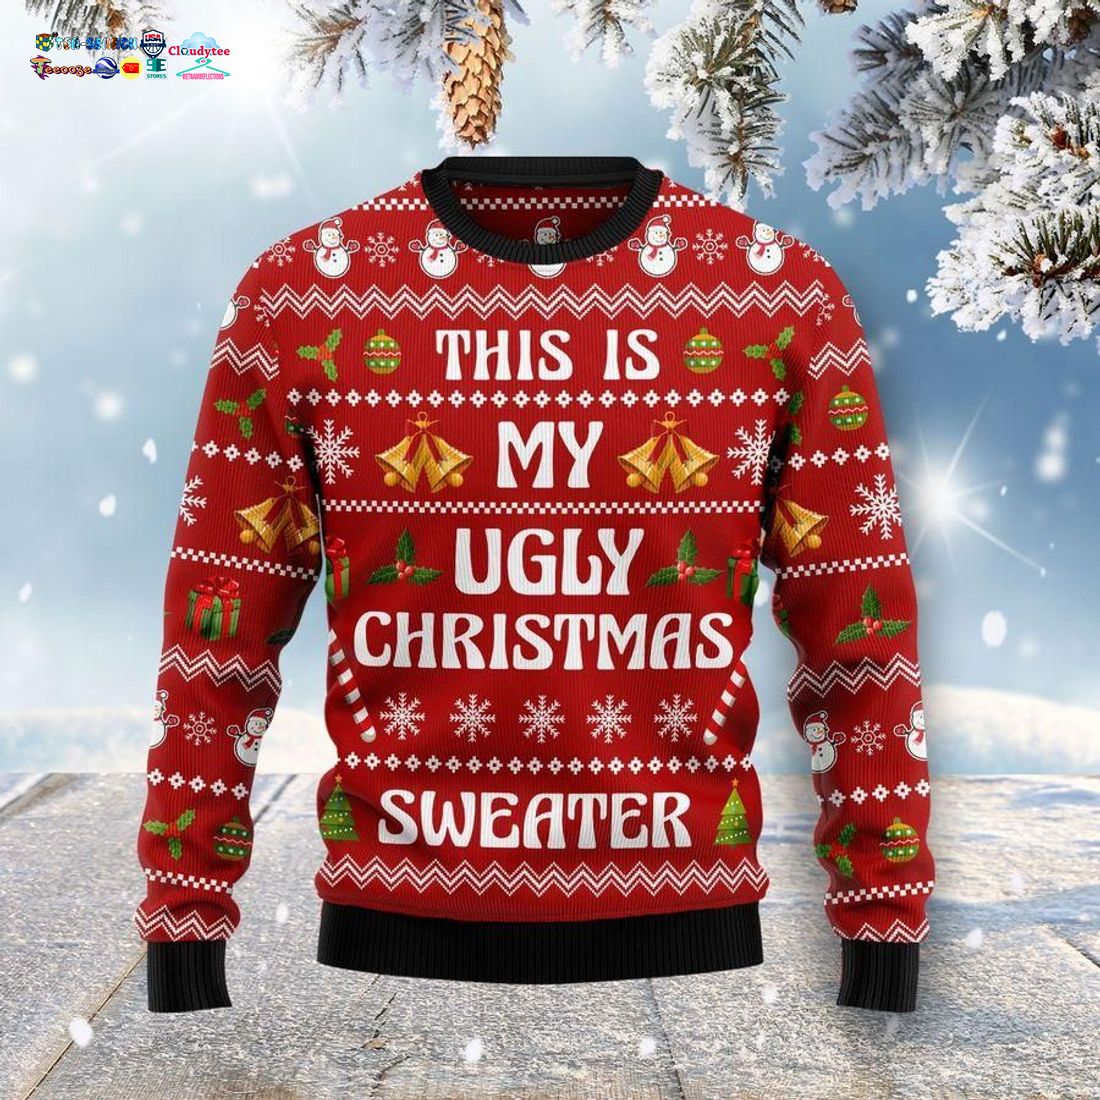 This Is My Ugly Christmas Sweater 3D Sweater - Impressive picture.